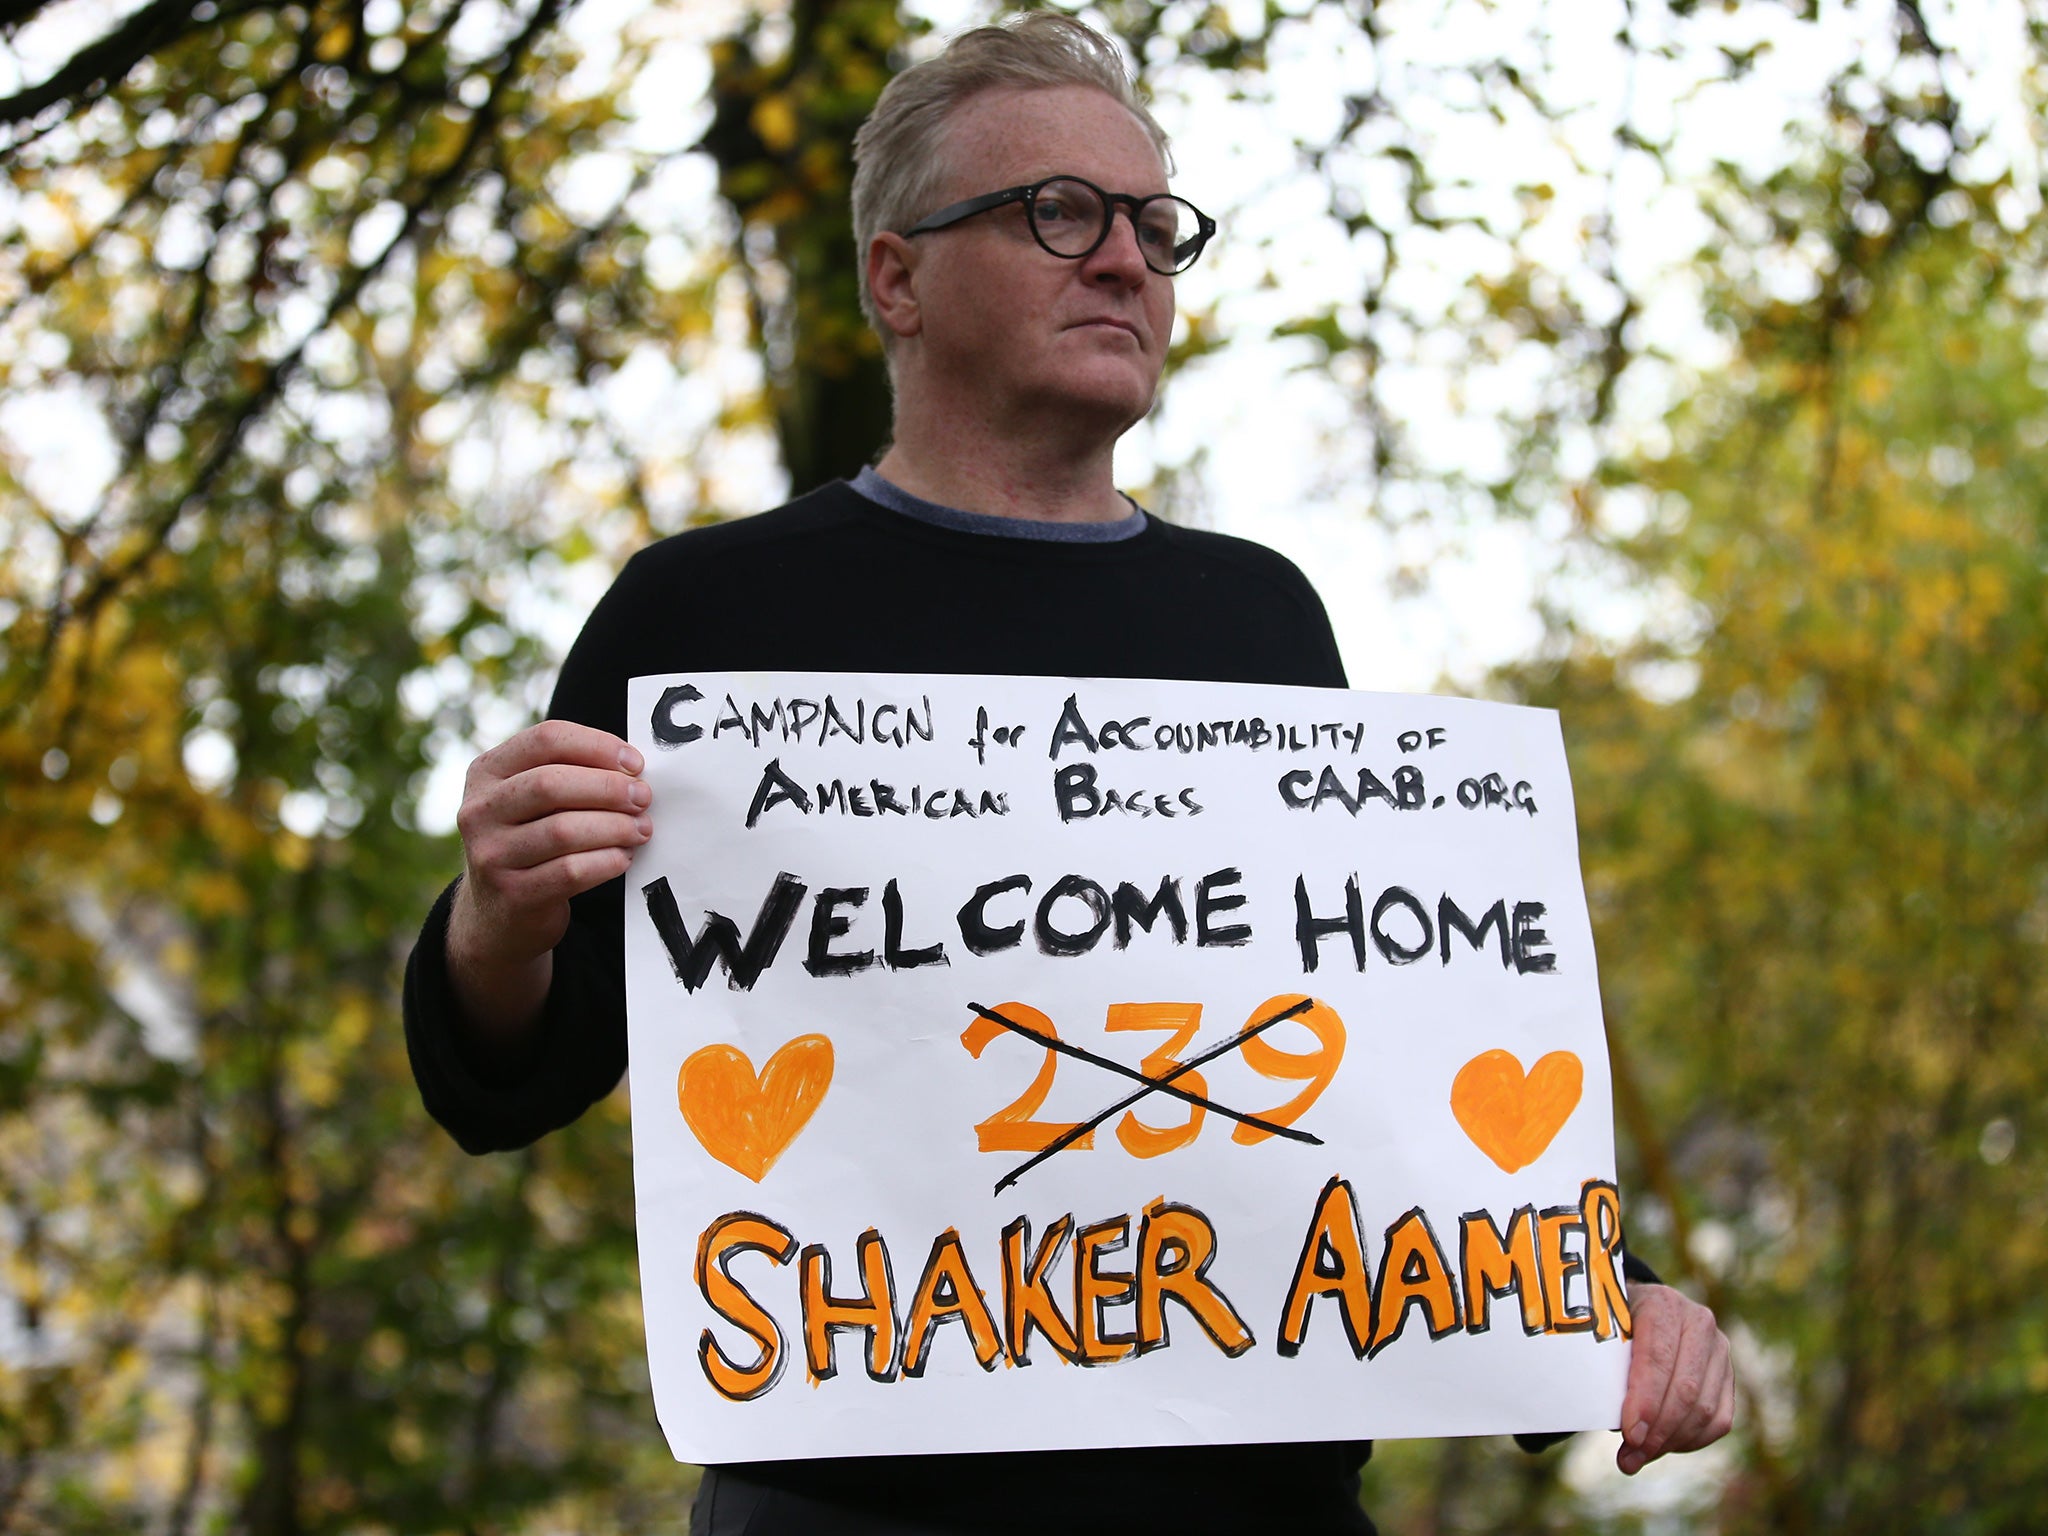 A campaigner at Biggin Hill Airport welcomes Shaker Aamer home